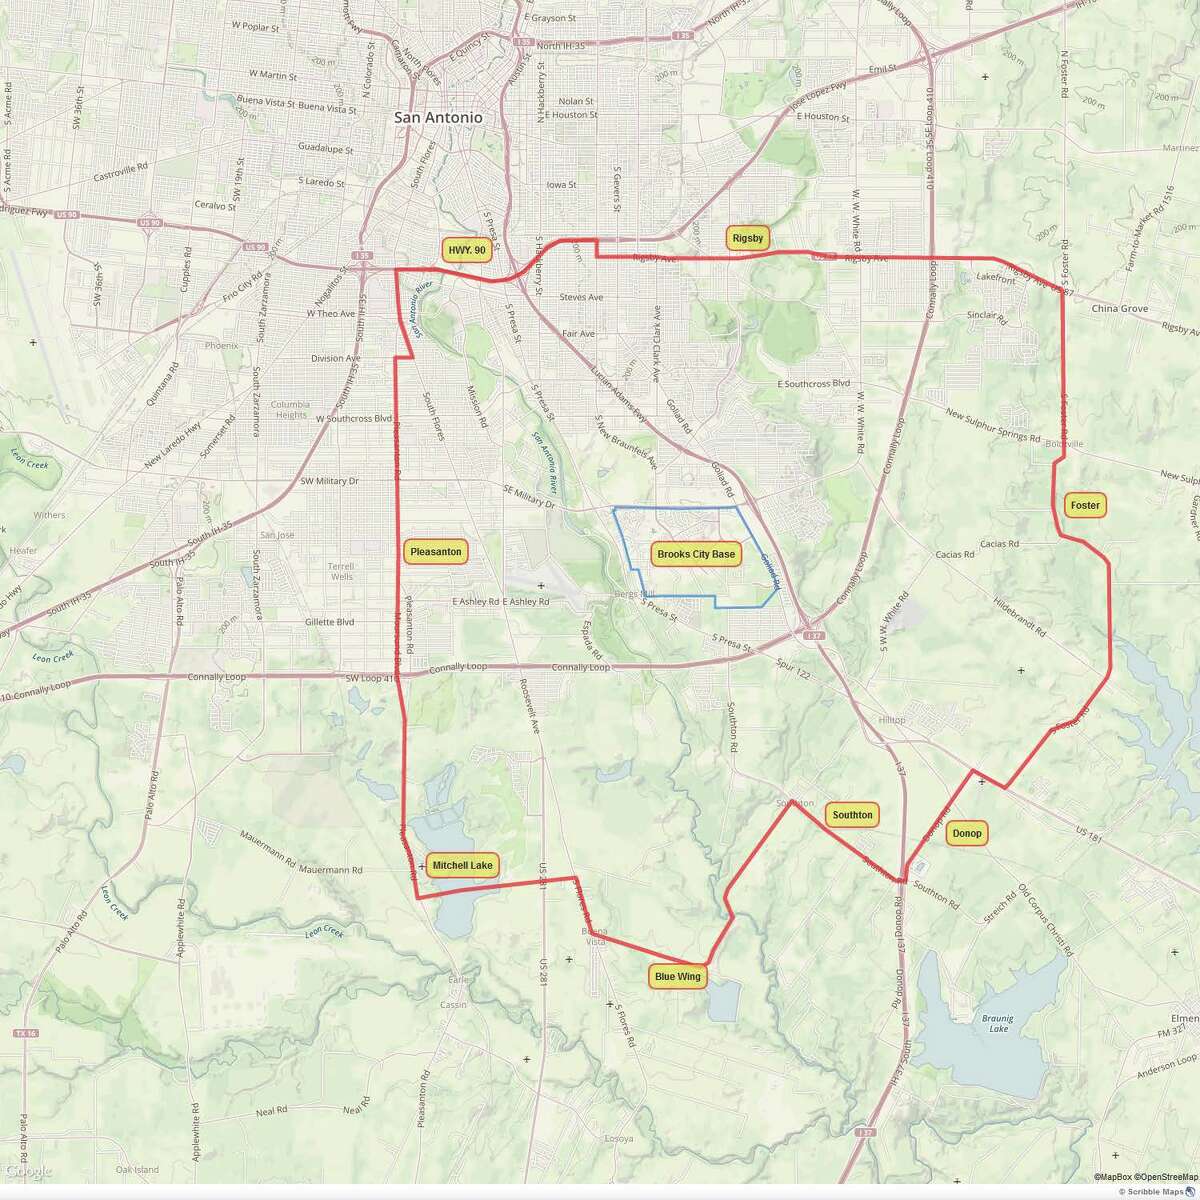 The Brooks Development Authority launched the program to encourage its workers to live within three miles of the Brooks City Base, as pictured above. Workers will receive $2,400 annually if renting and a one-time incentive of $3,600 if purchasing a home. Click though the slideshow to see 10 homes that lay within the three-mile radius.